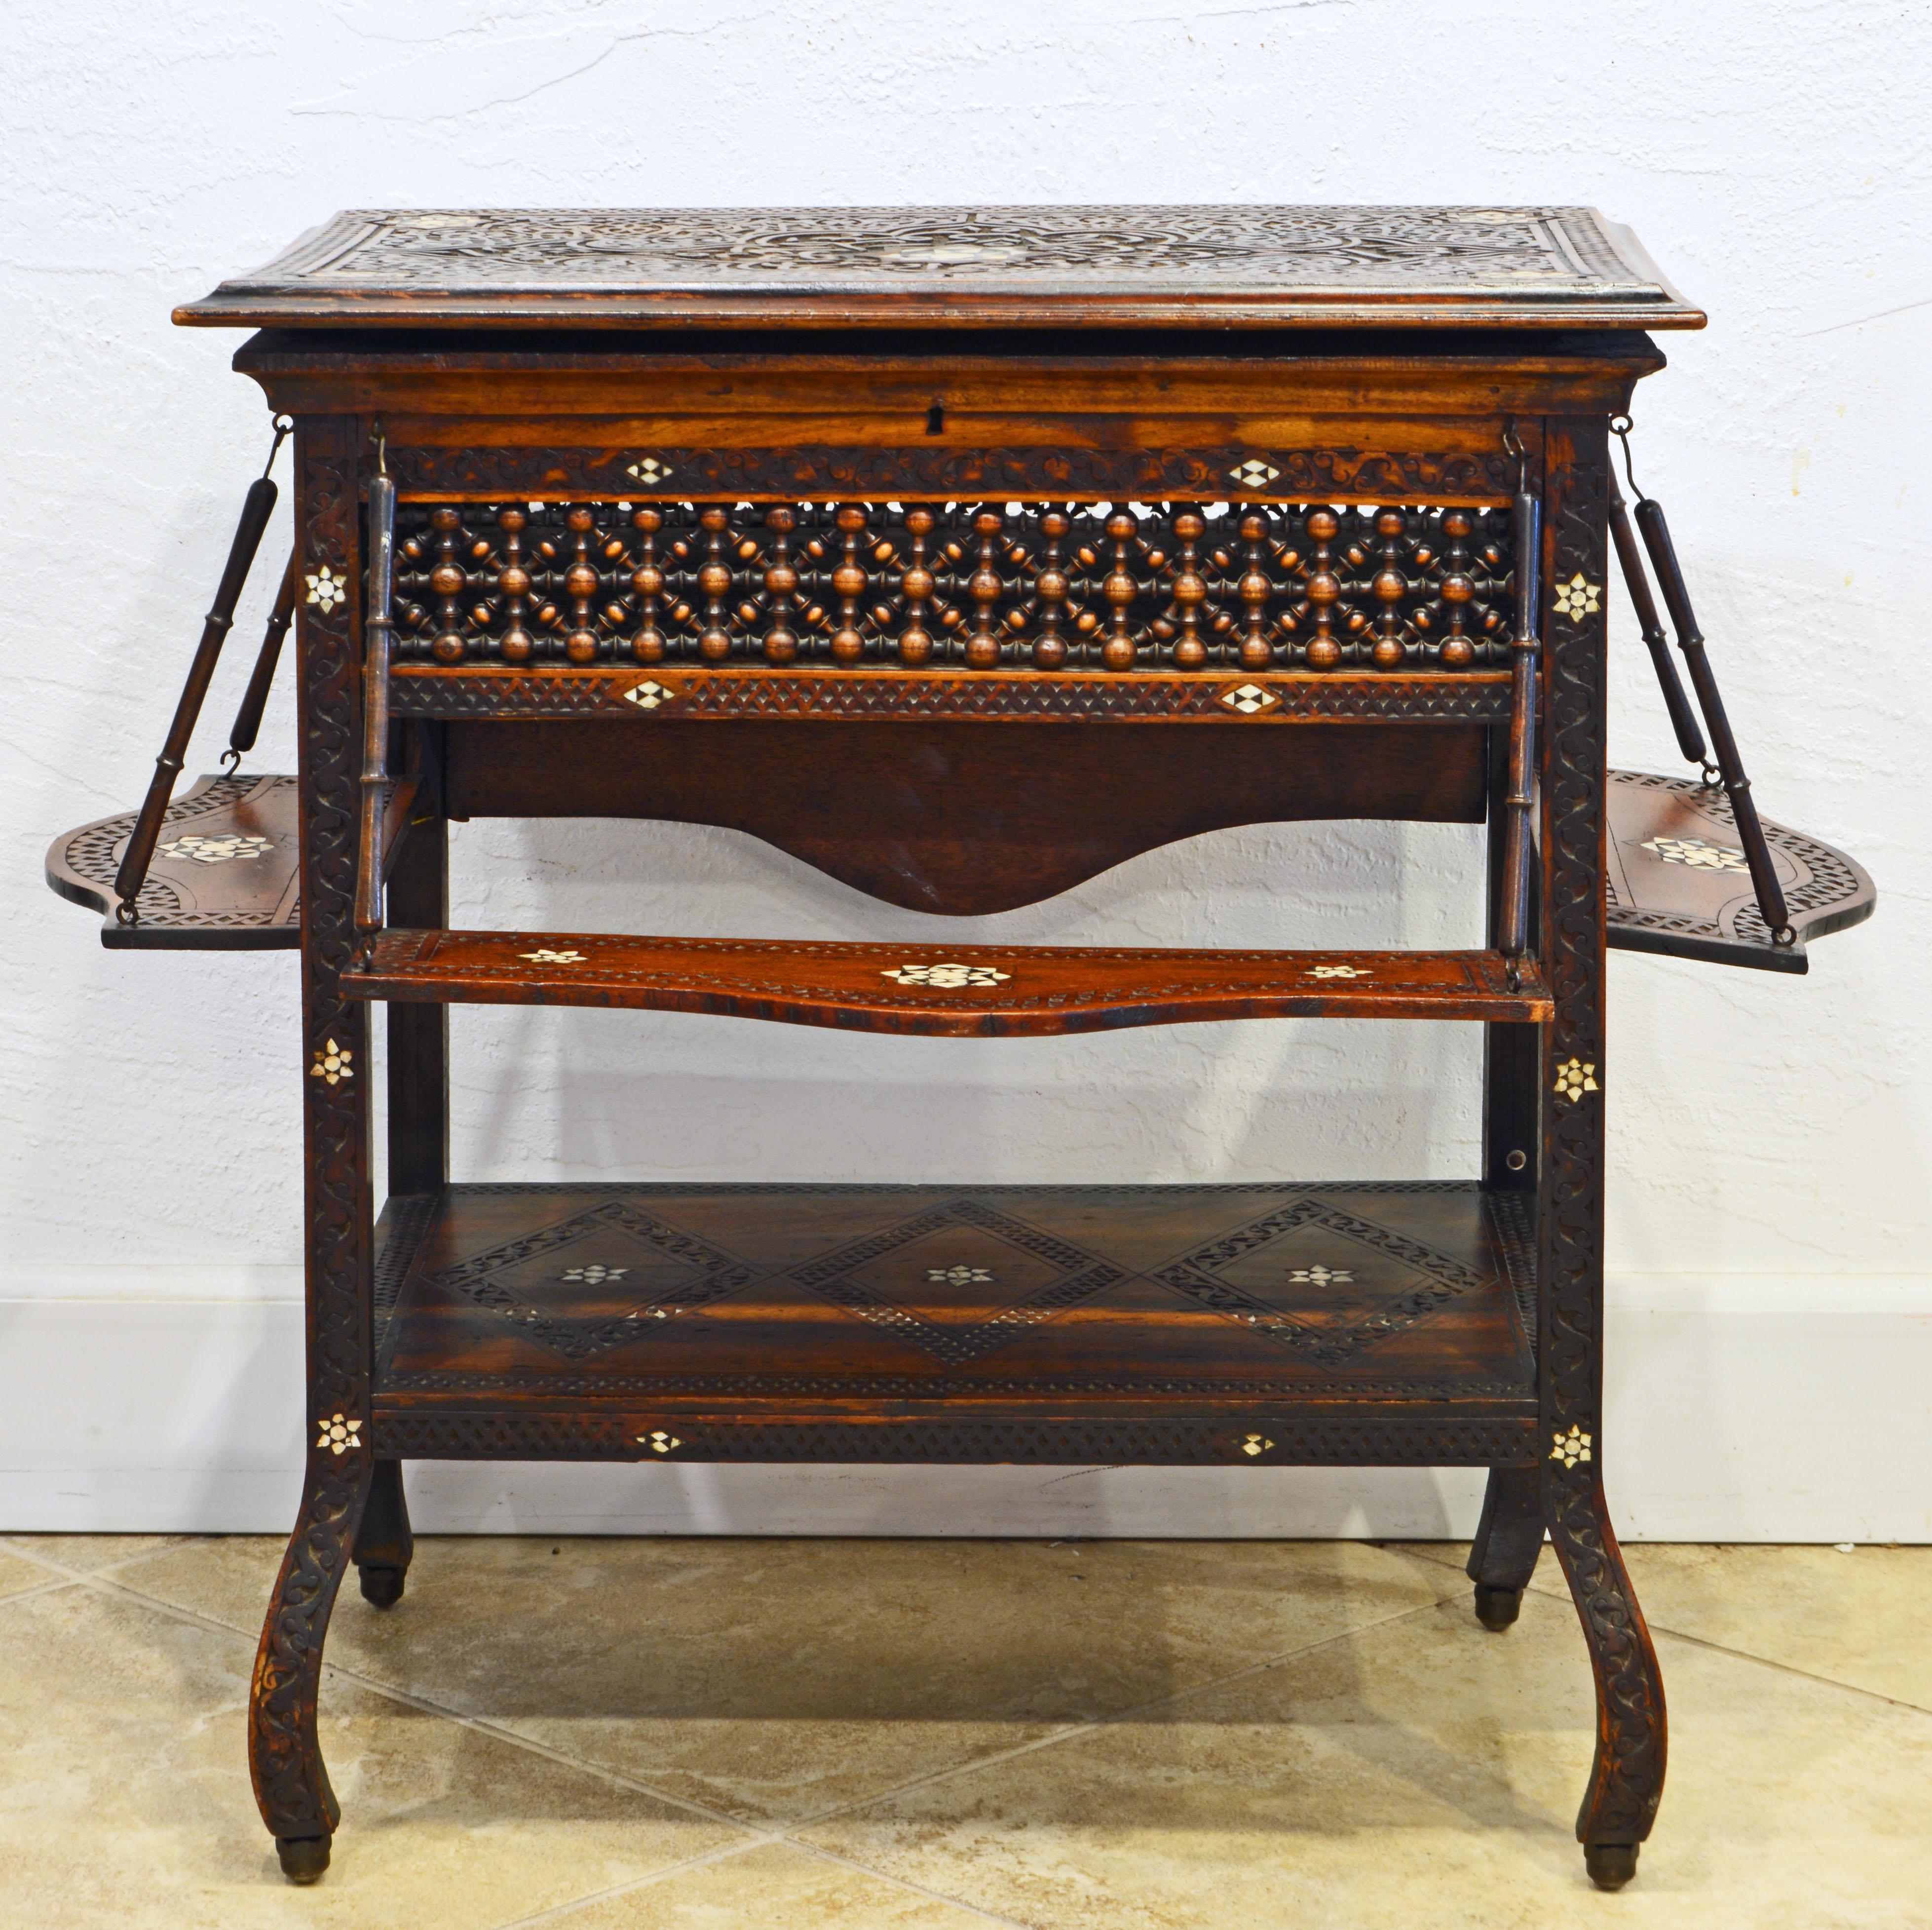 This unusual Moroccan aside table features a richly carved and inlaid top that opens up to a storage compartment above fretwork aprons and a second lower tier. On three sides there are suspended extra shelves, a feature found in several Middle East